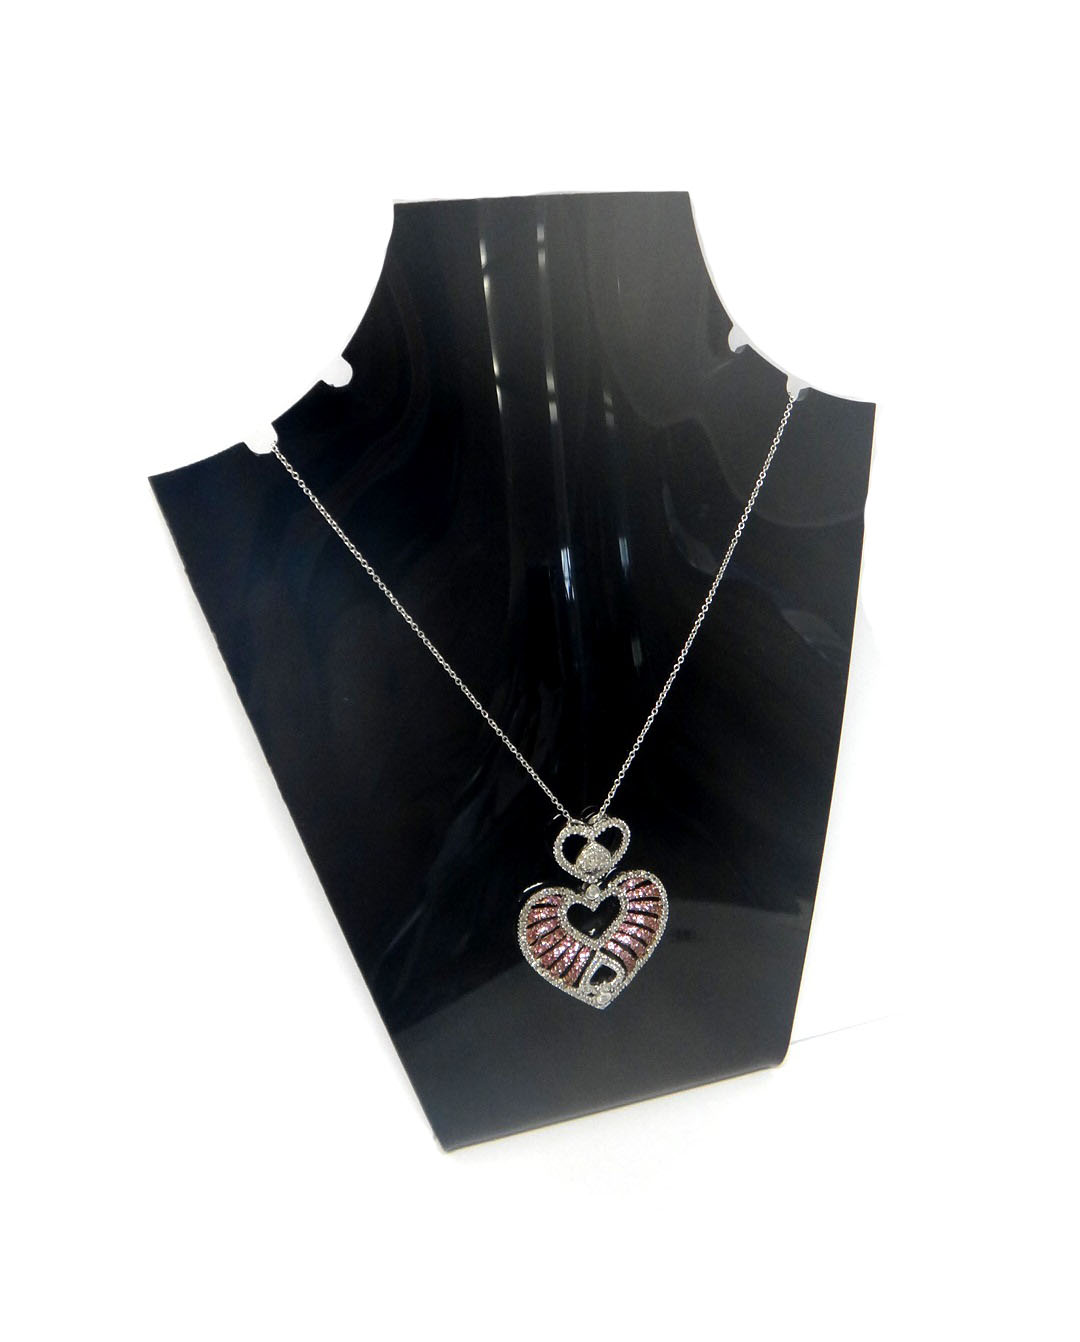 A pink sapphire and diamond set pendant, in an open heart shaped design, with further heart shaped